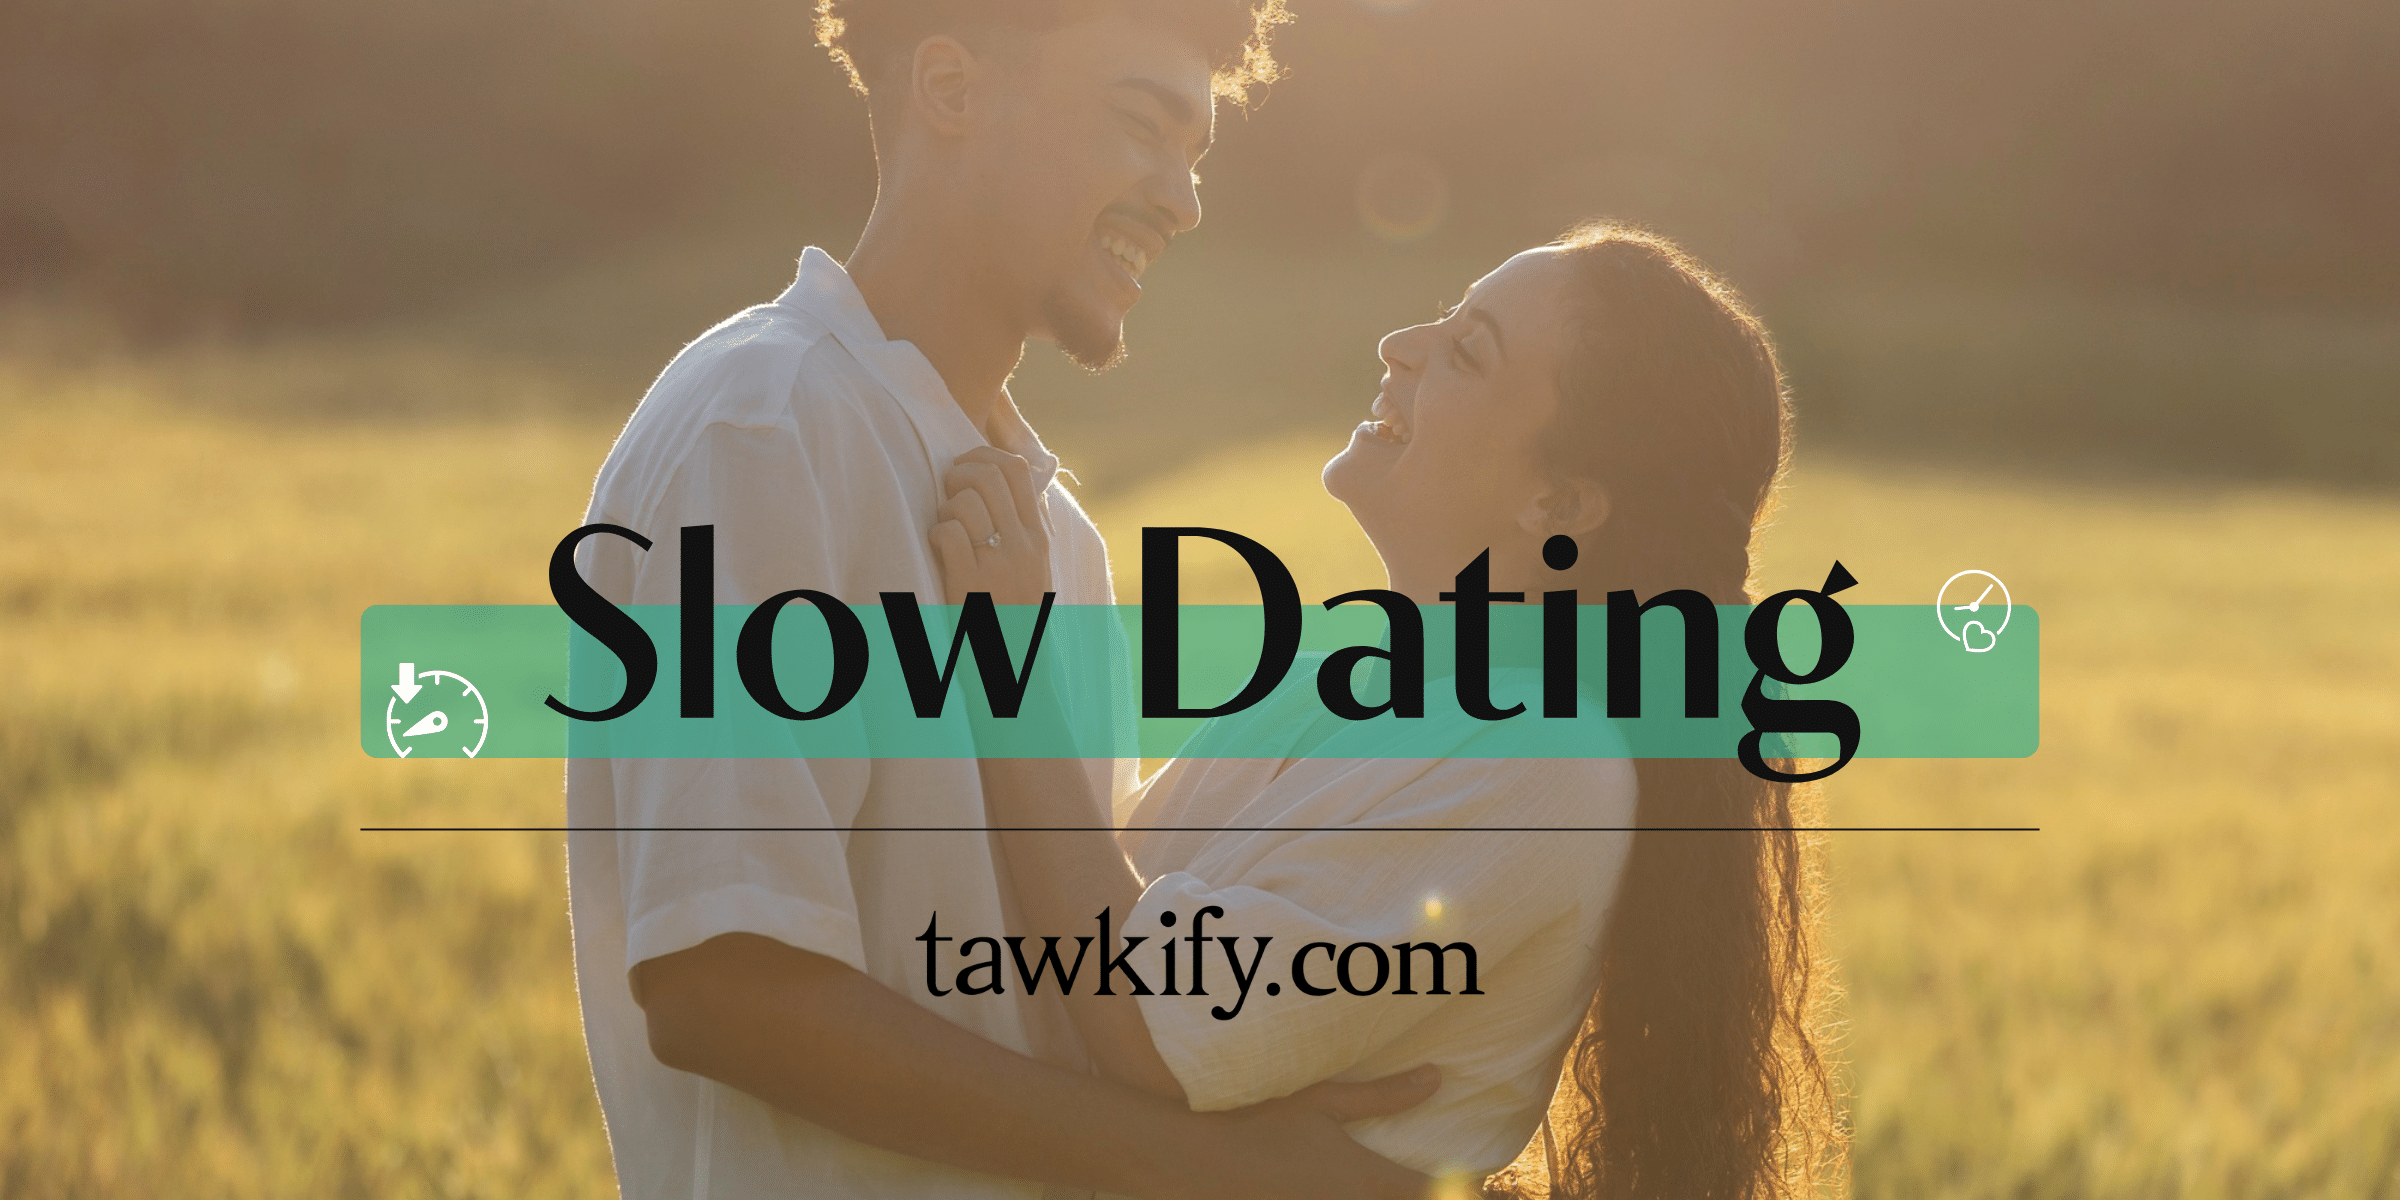 If your dating speed feels as fast as lightning, it might be time to consider slow dating. Follow our guide to learn how to take a slower approach to finding love.